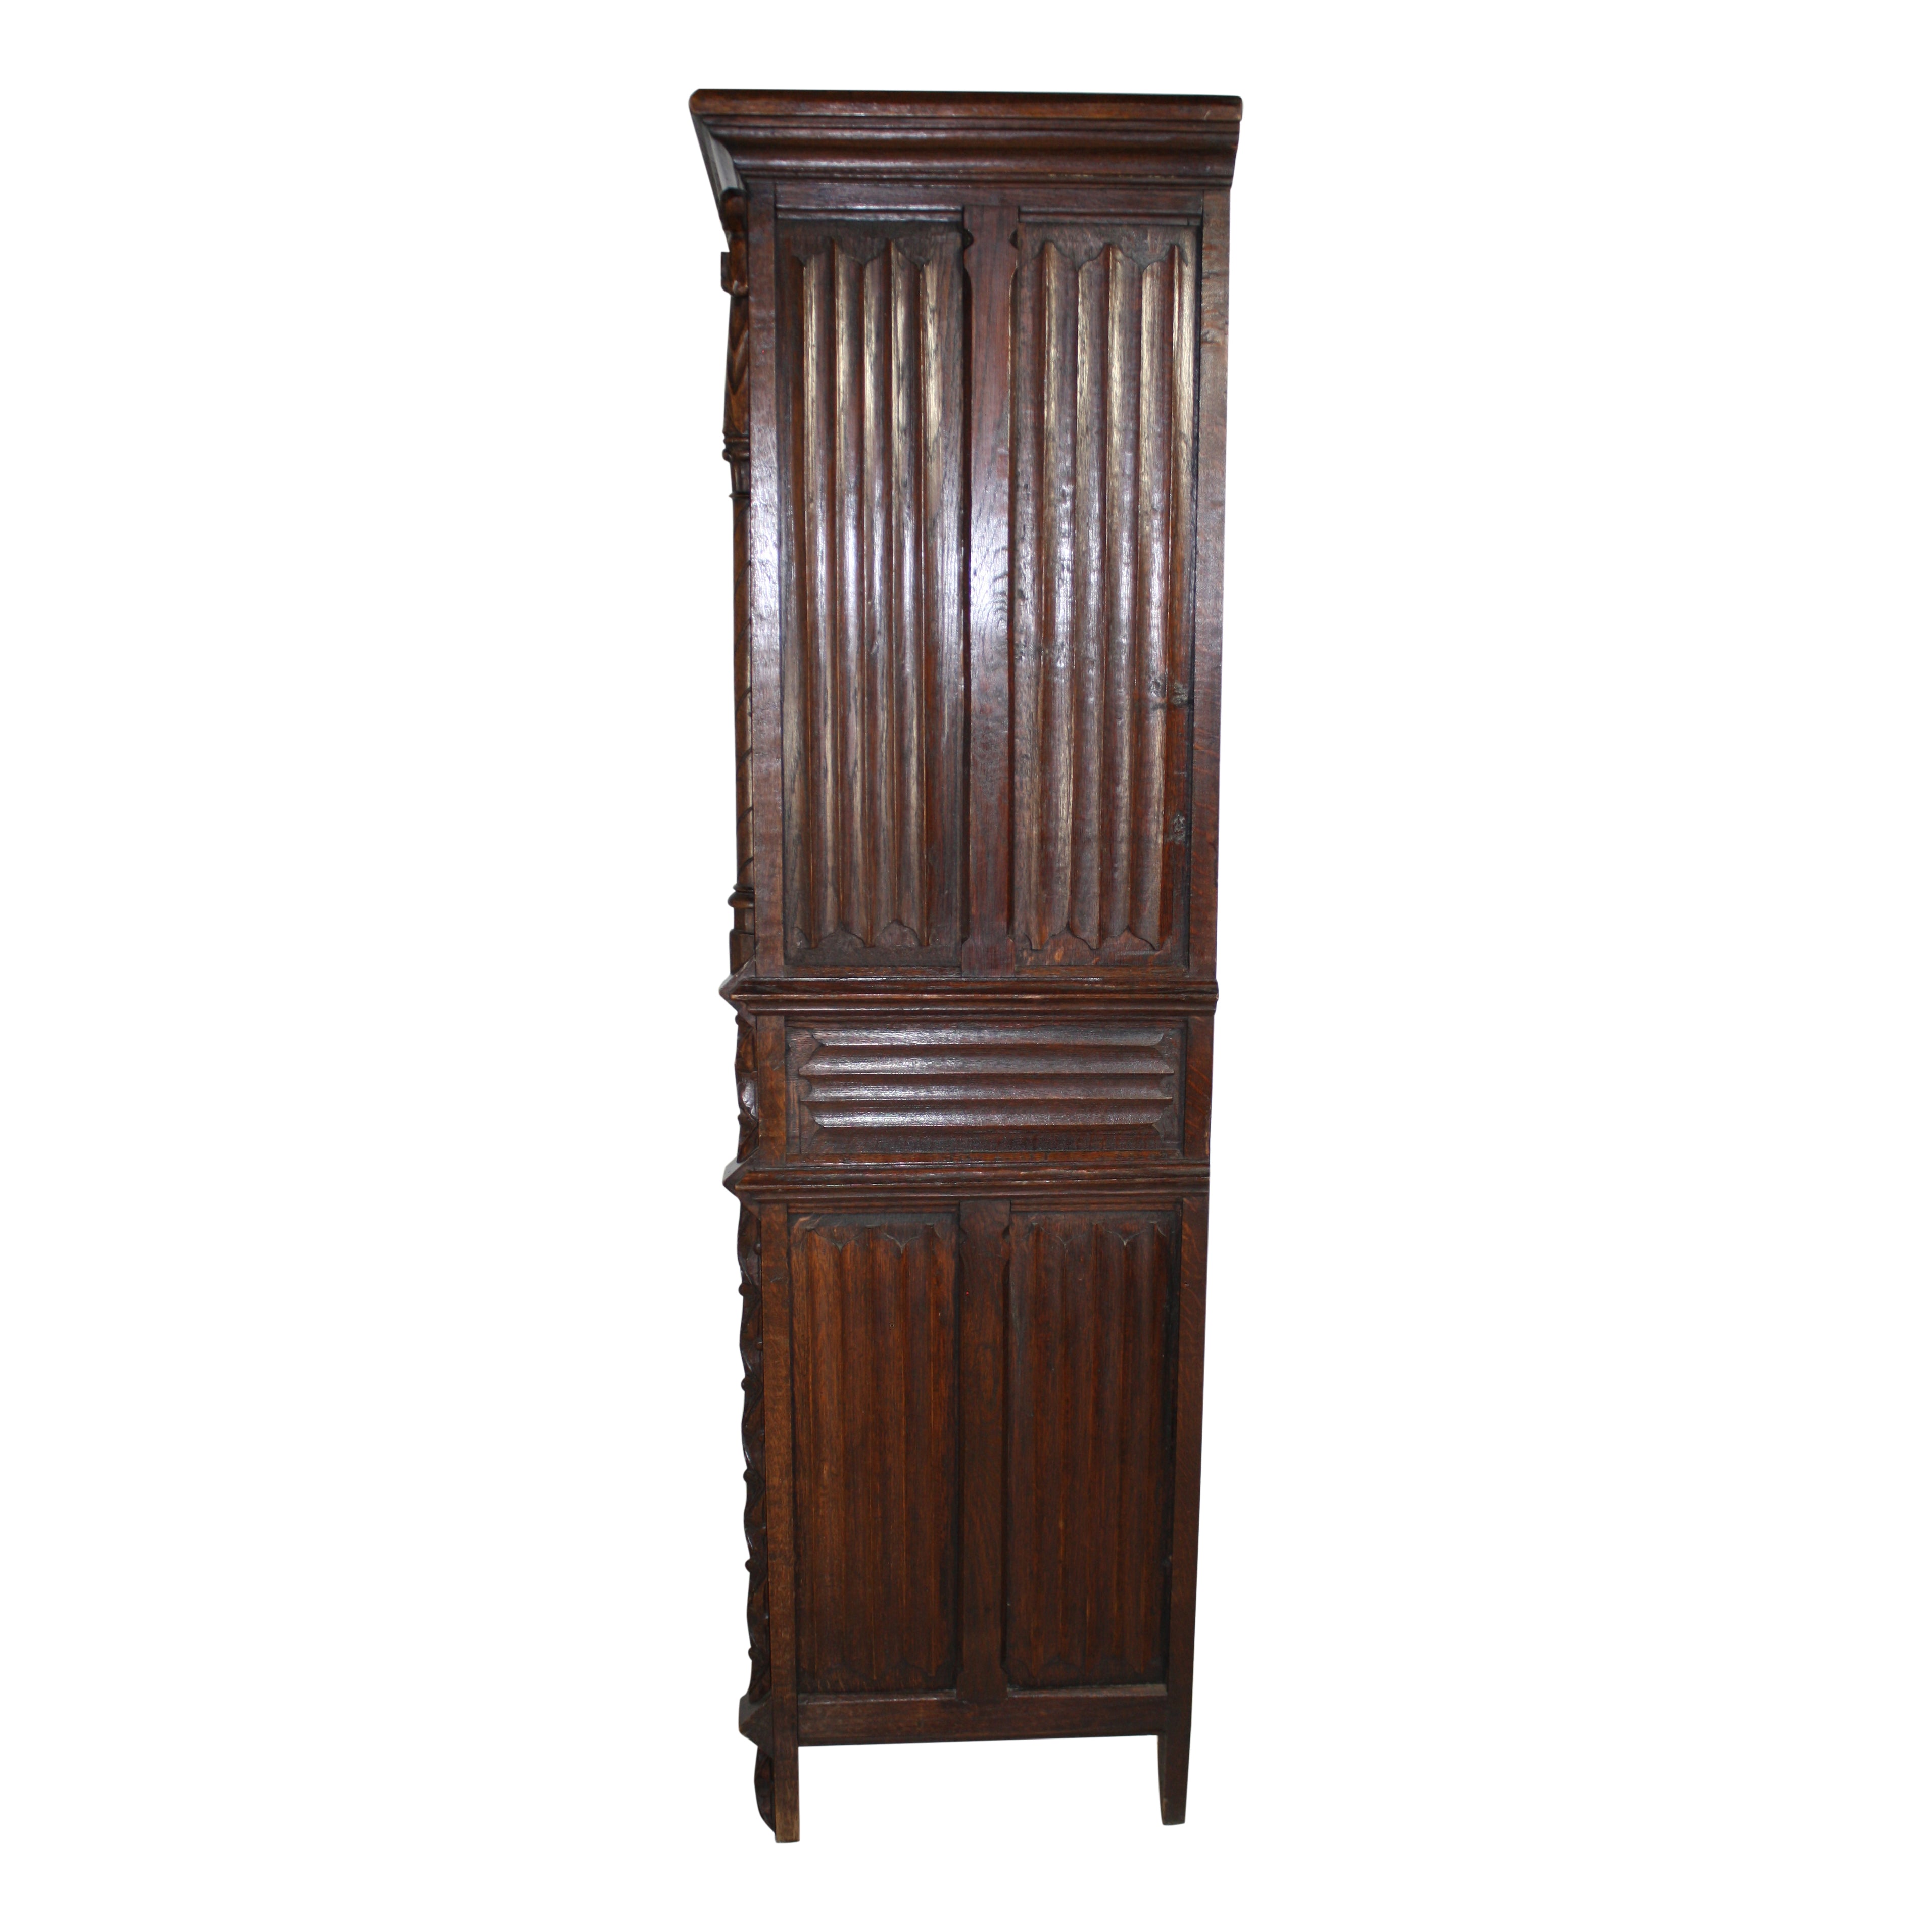 Gothic Revival Cabinet with Green Glass